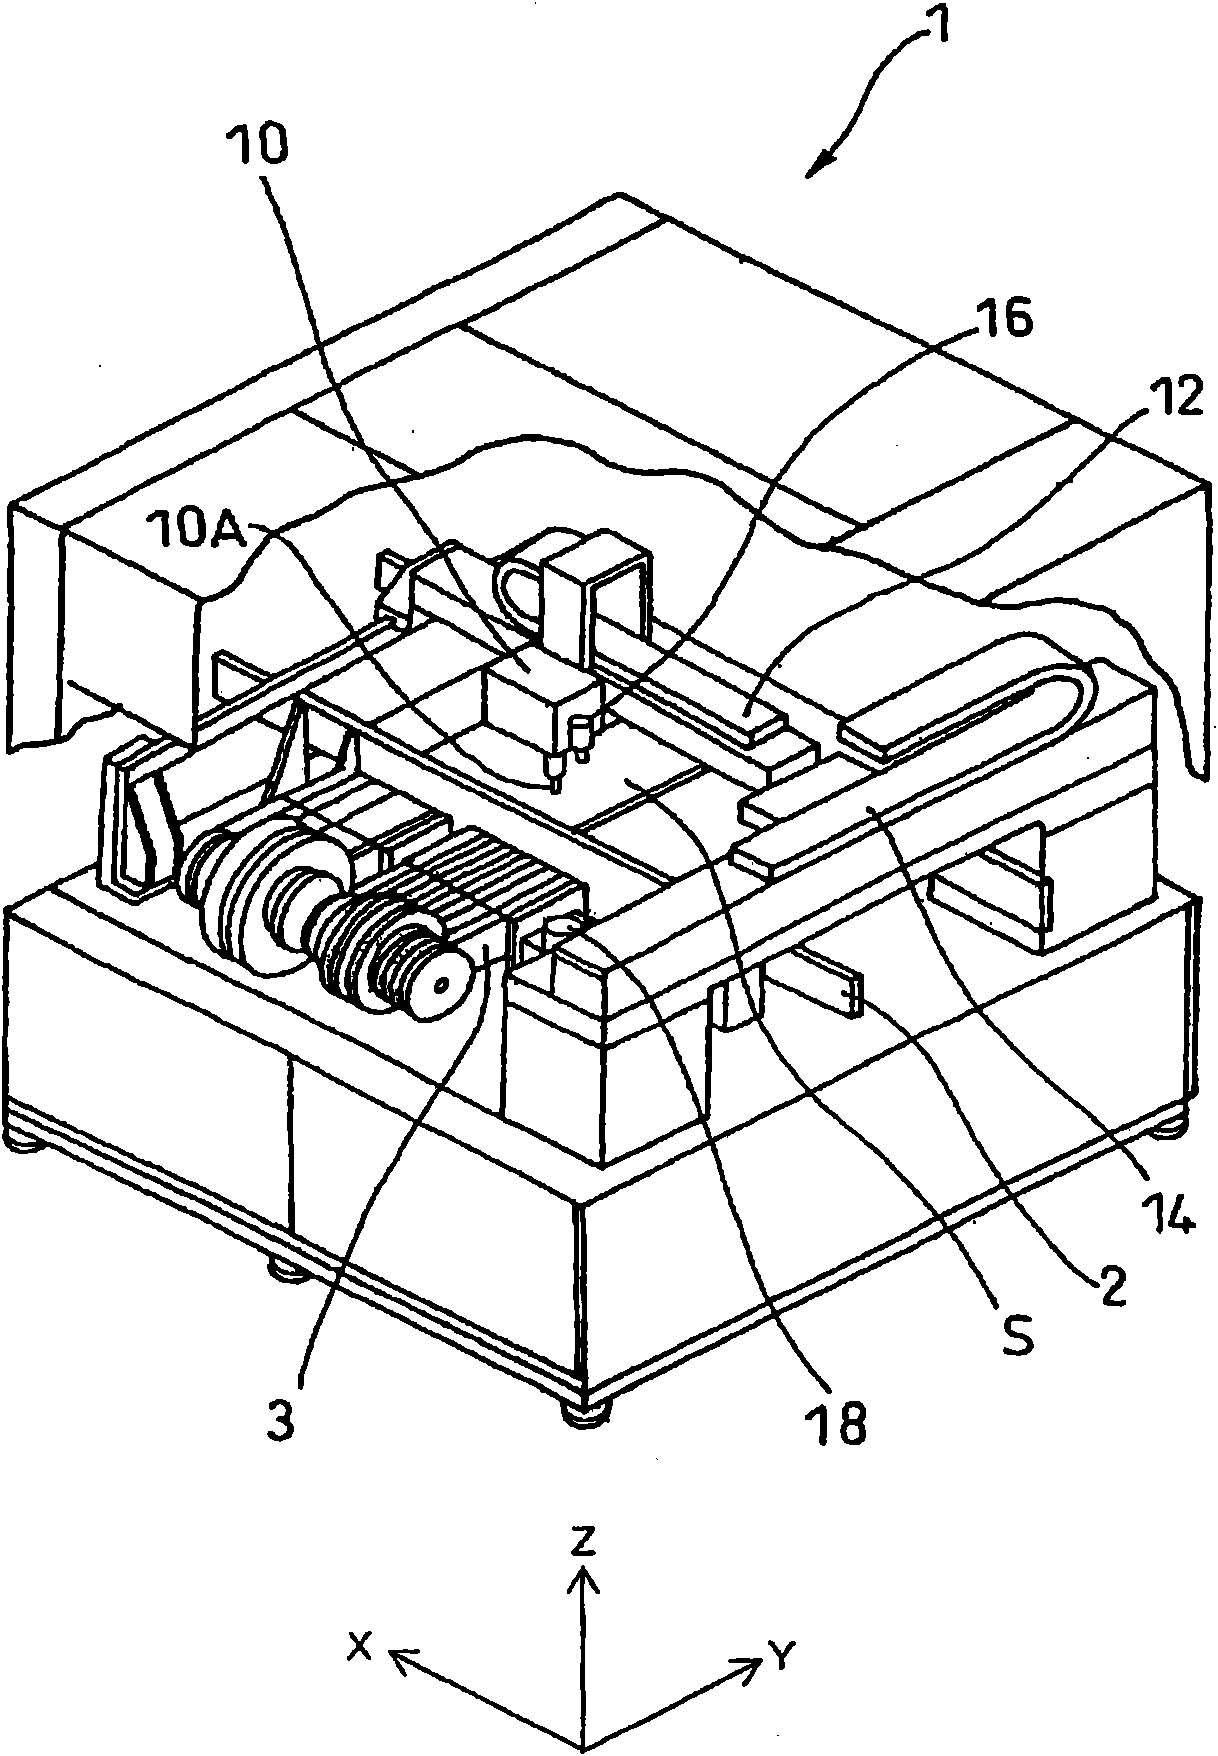 Carrying head of electronic components